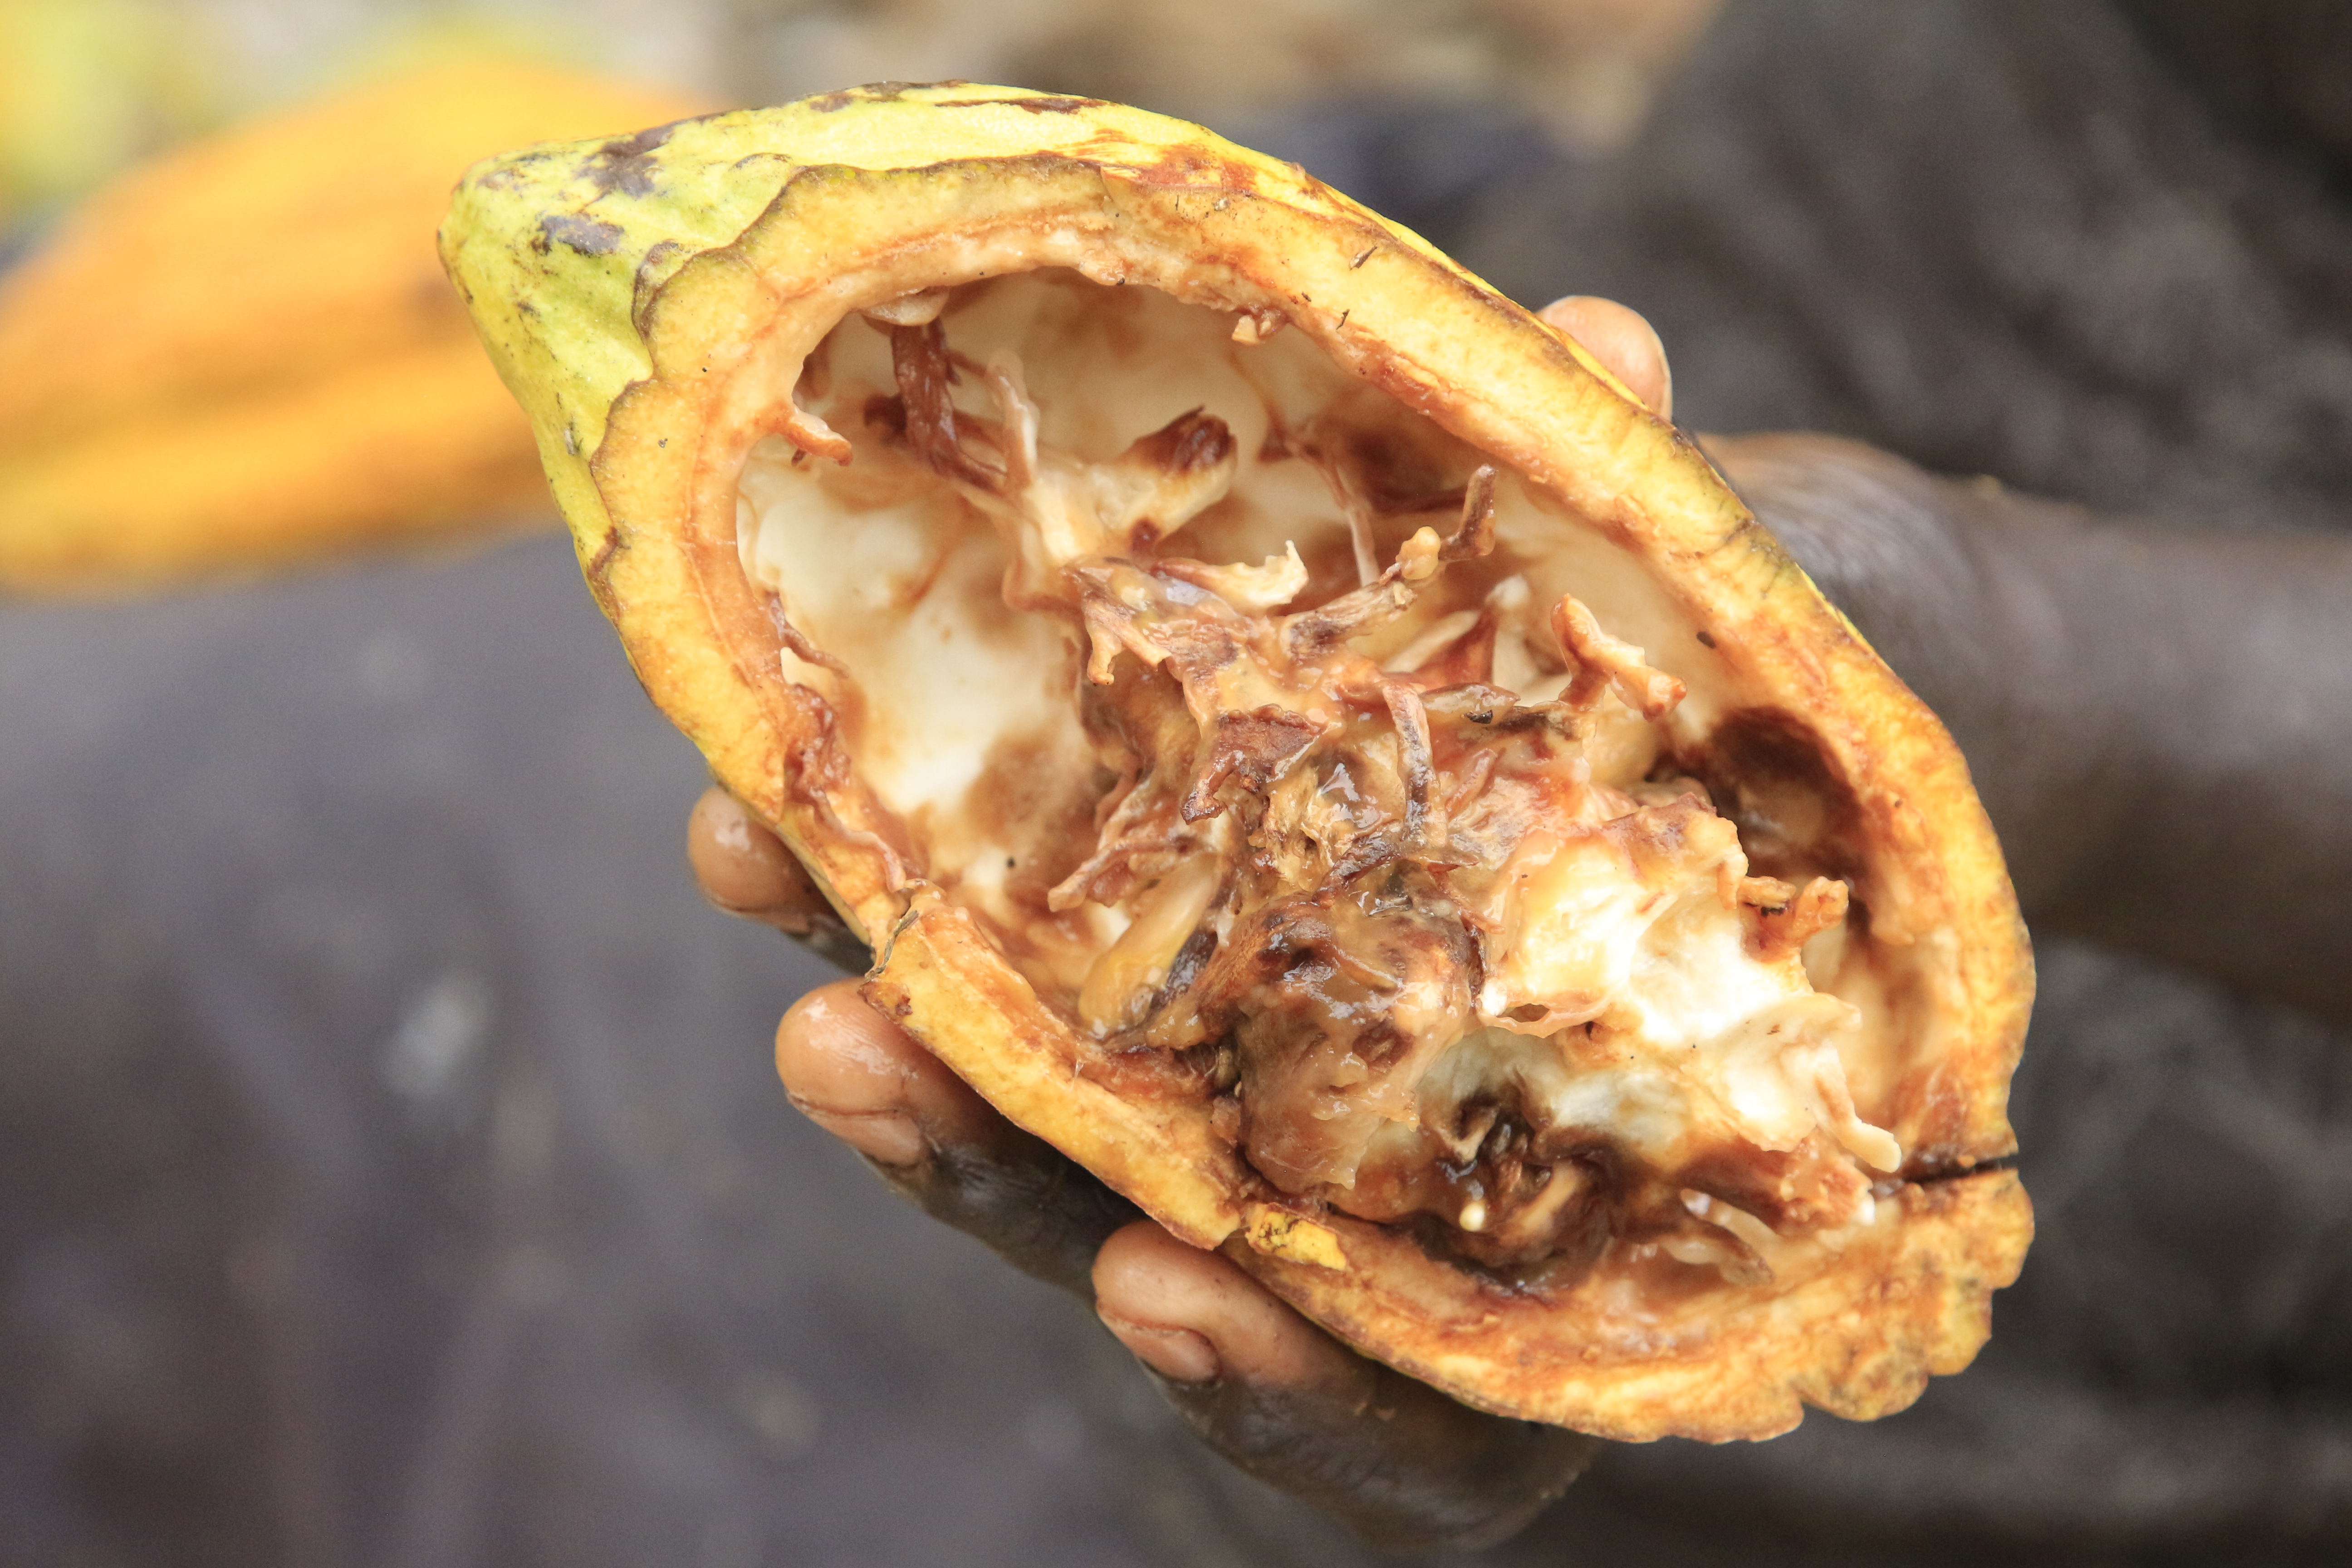 Cocoa pod infected by the CPB